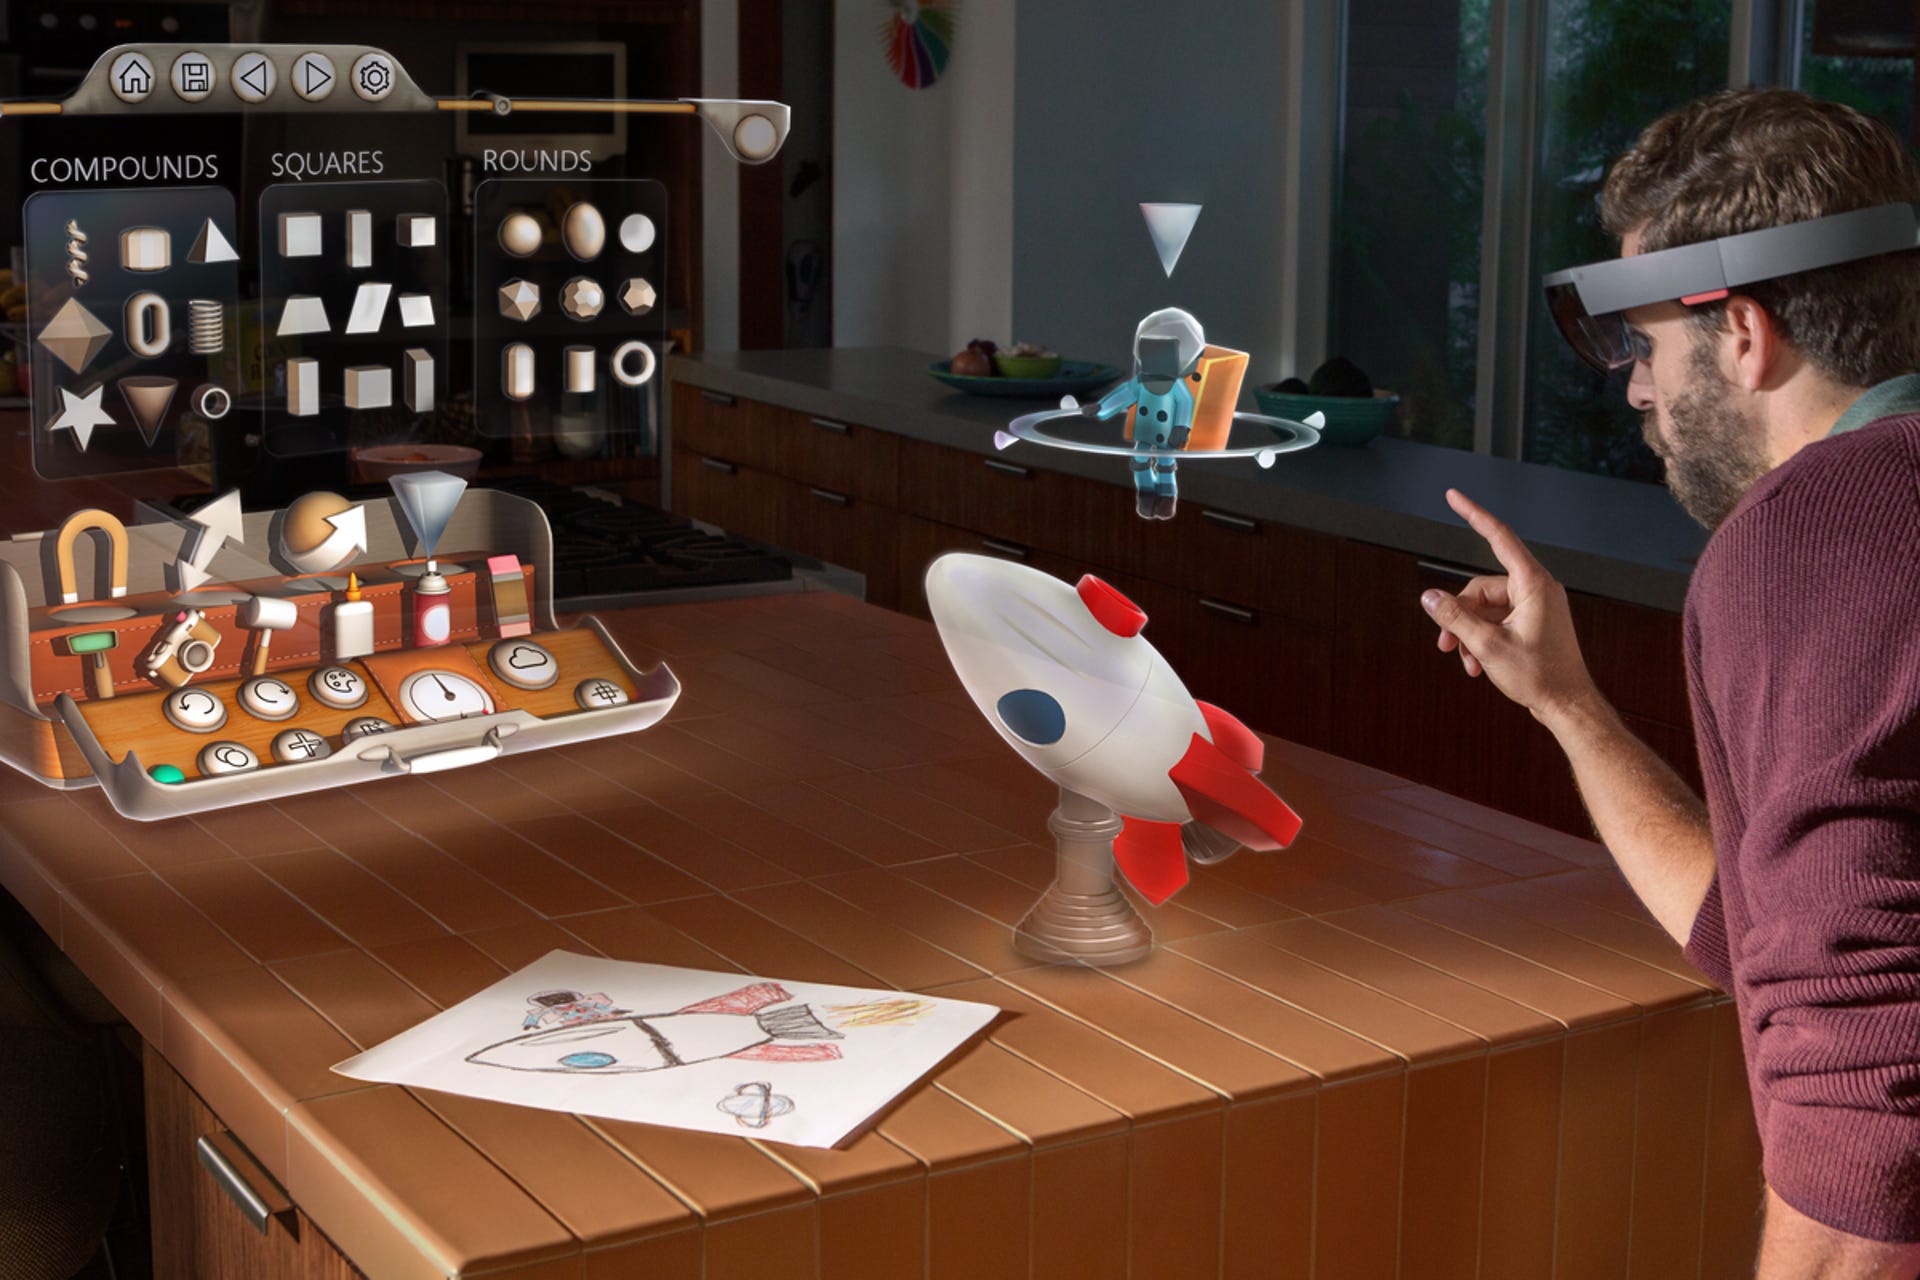 Microsoft's HoloStudio design software combines a virtual 3D world with the real world.